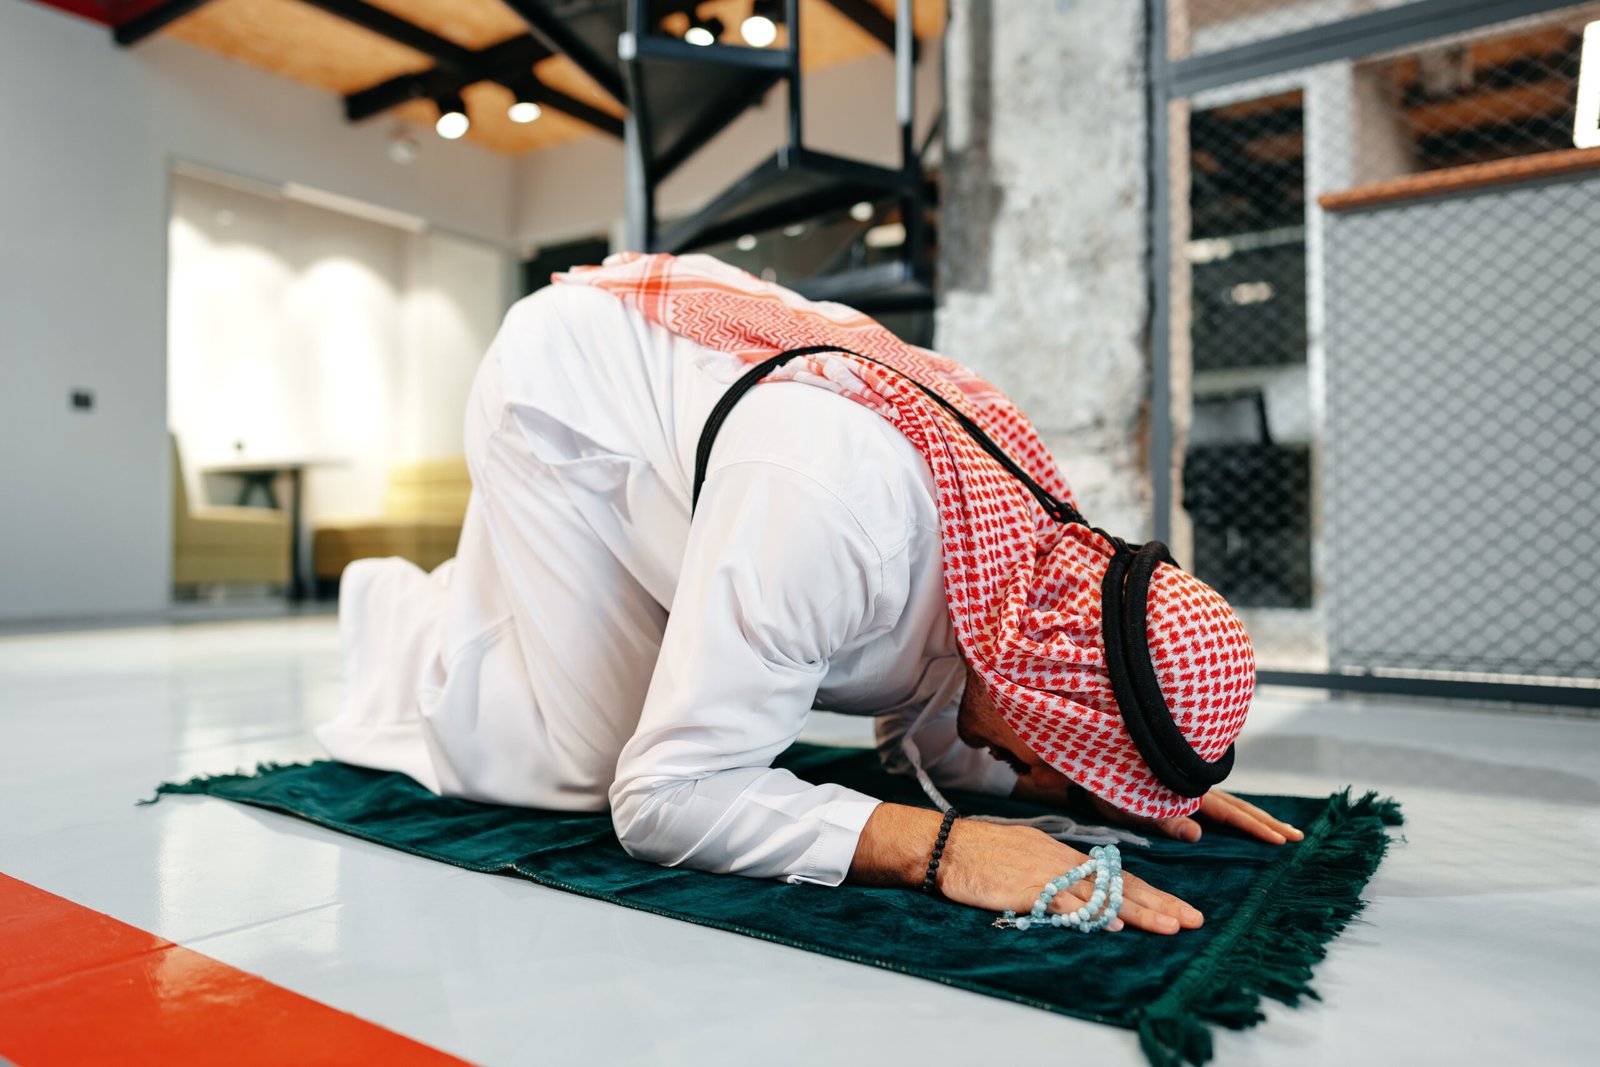 Man performing a Sajdah on a prayer mat showing the importance of Prayer in Islam.